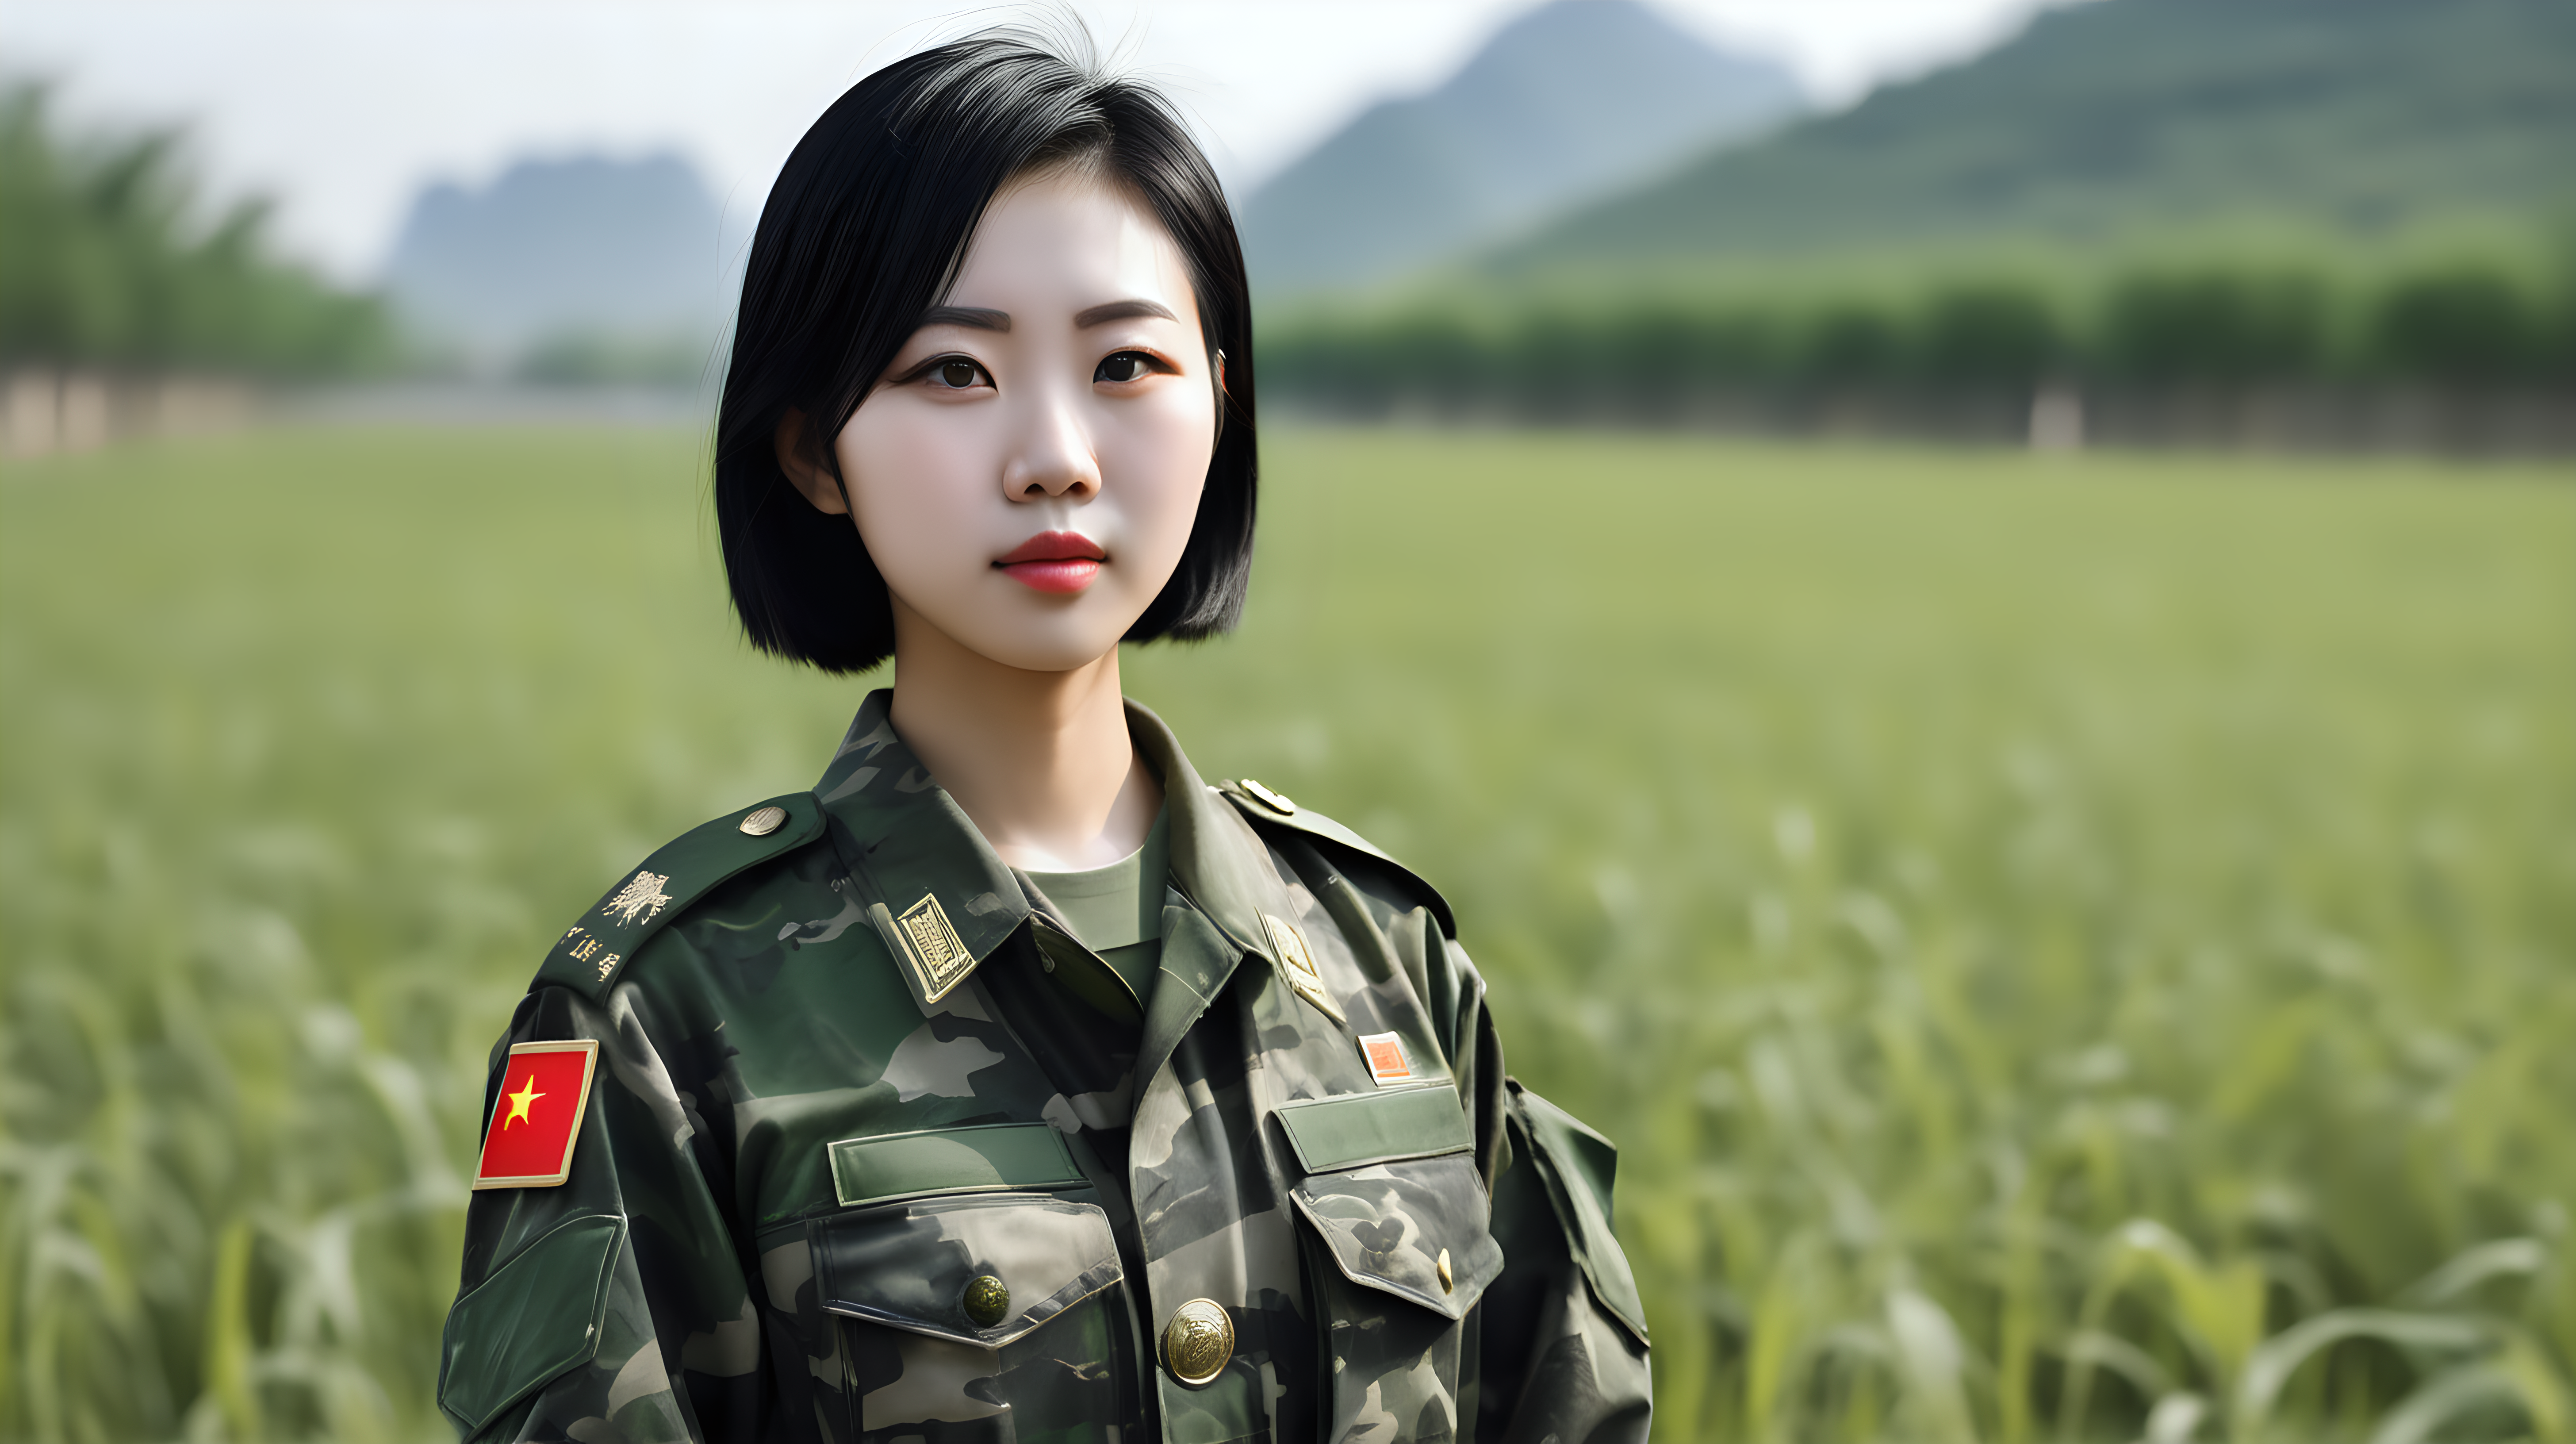 A Chinese female soldierYoung personBlack hairShort hairCamouflage uniformStanding